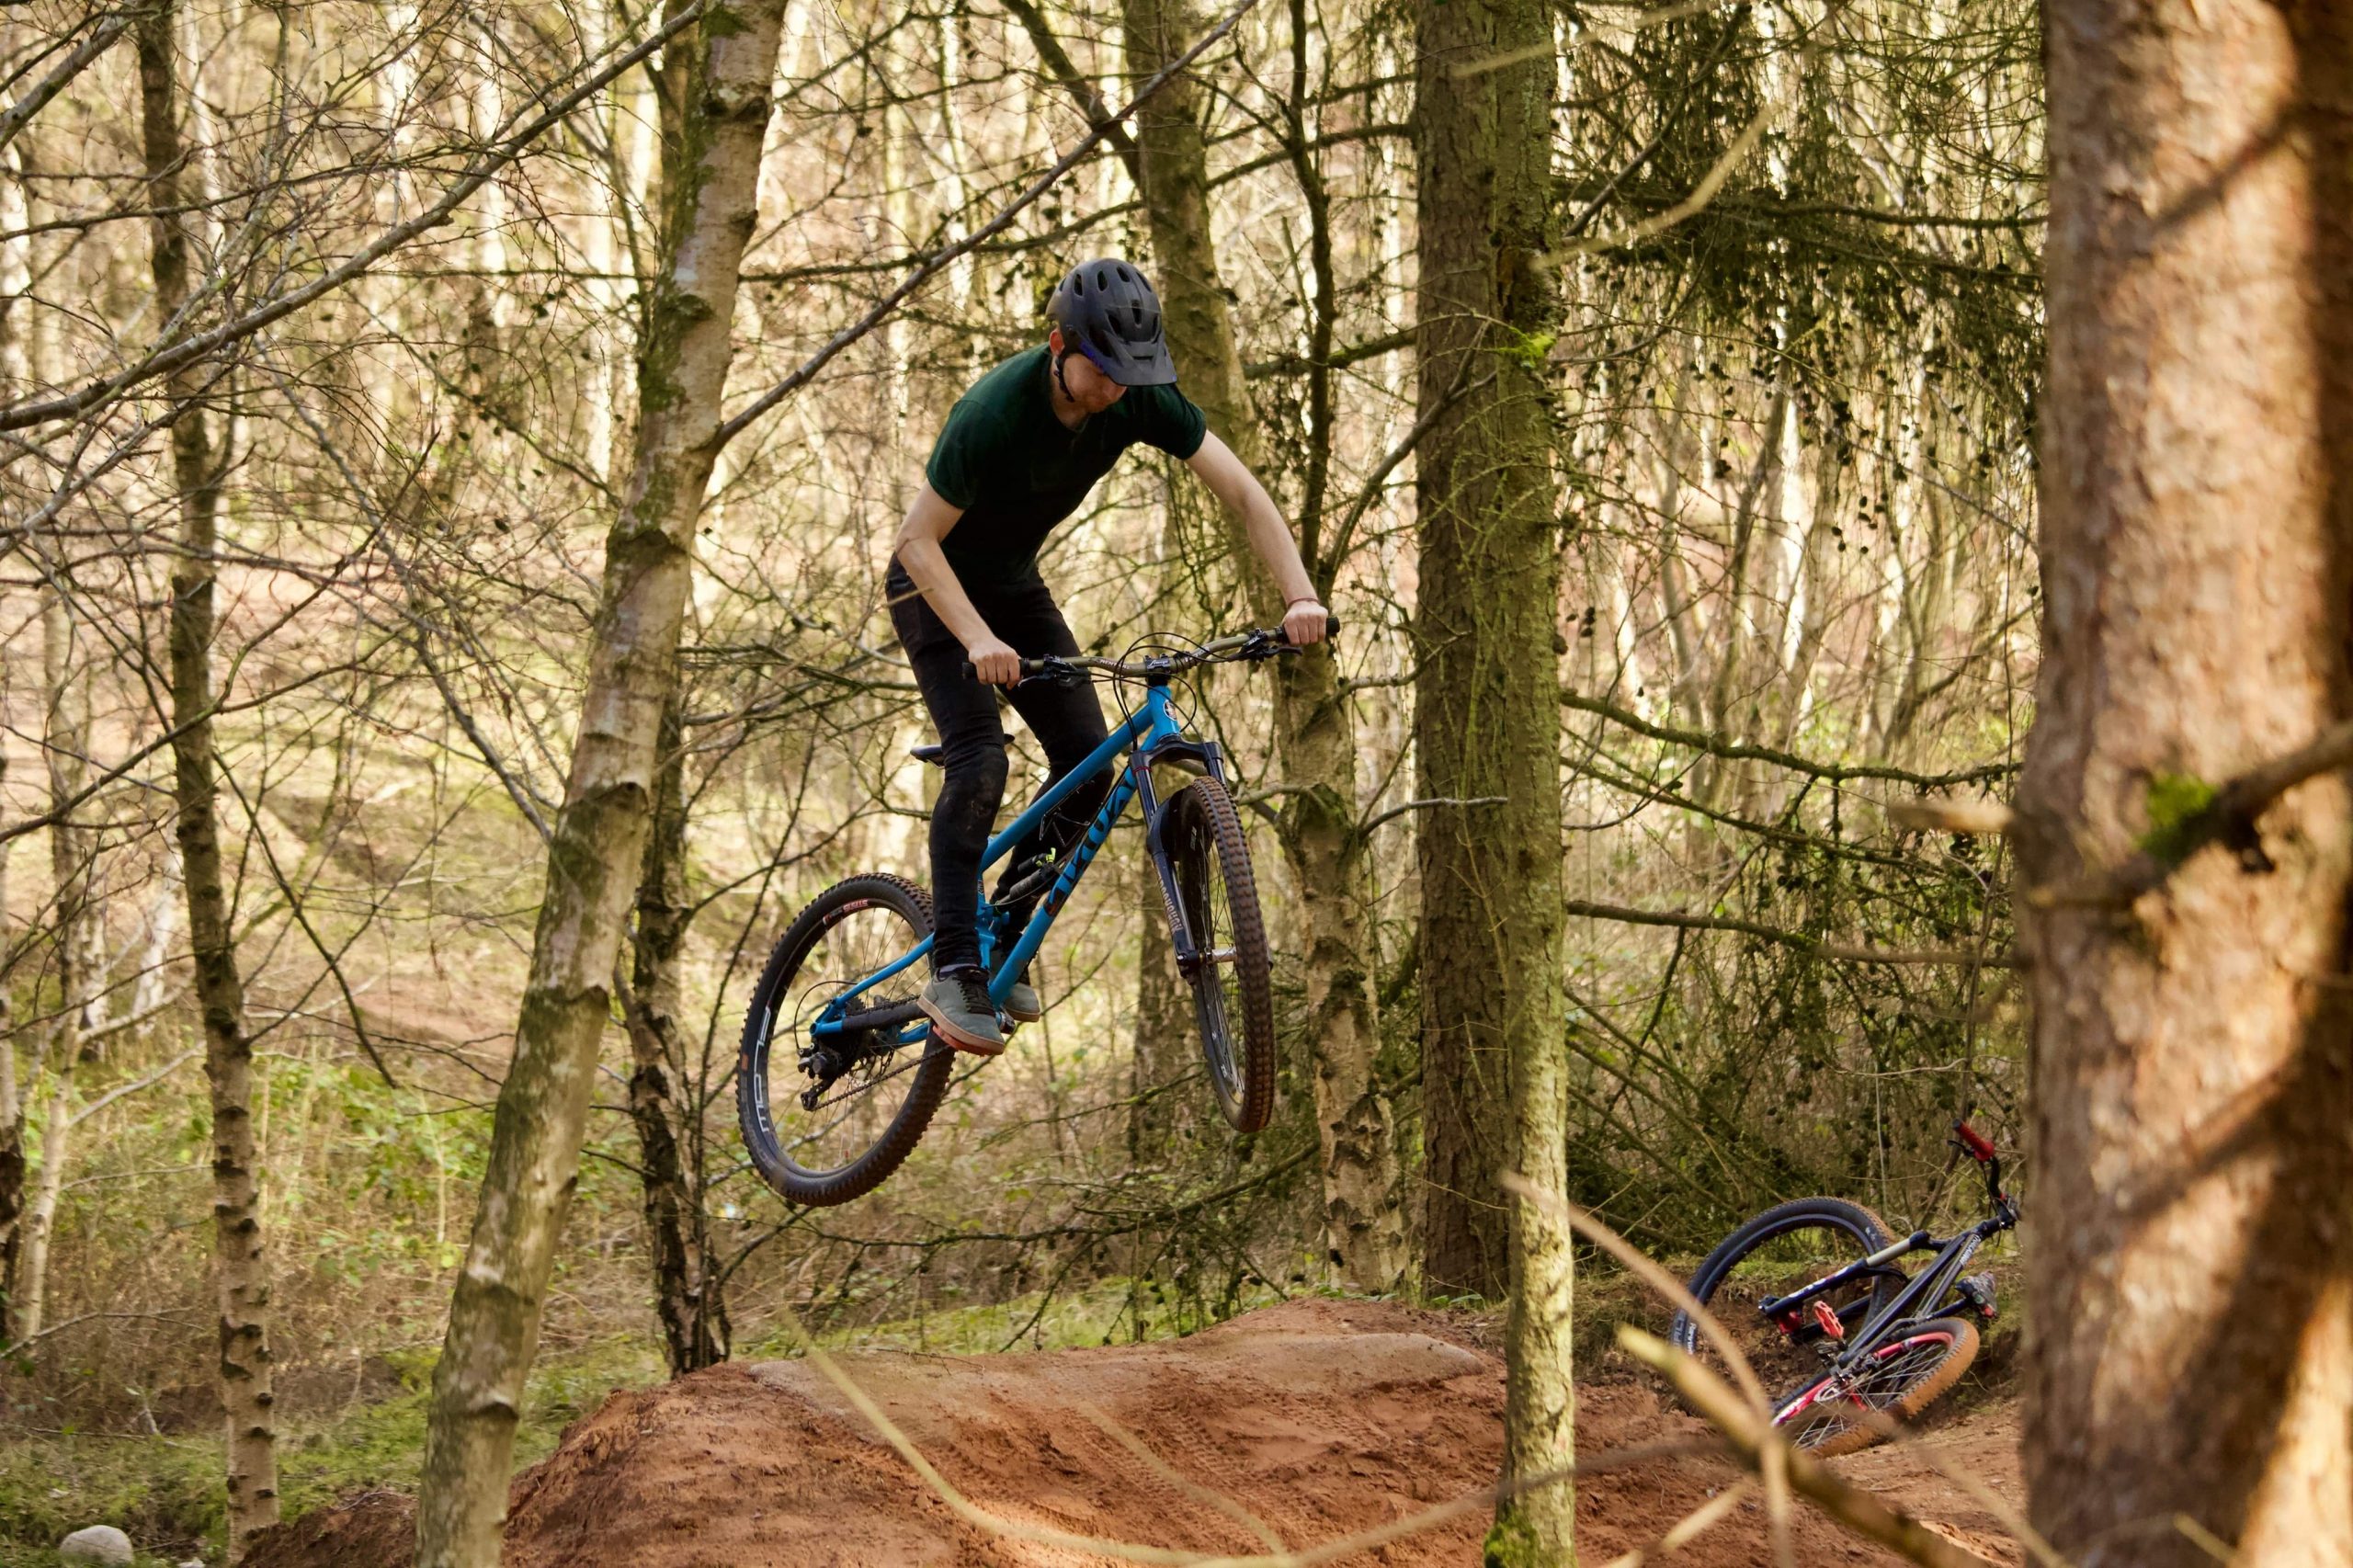 Mountain bike rider in mid air over a sandy jump in the woods